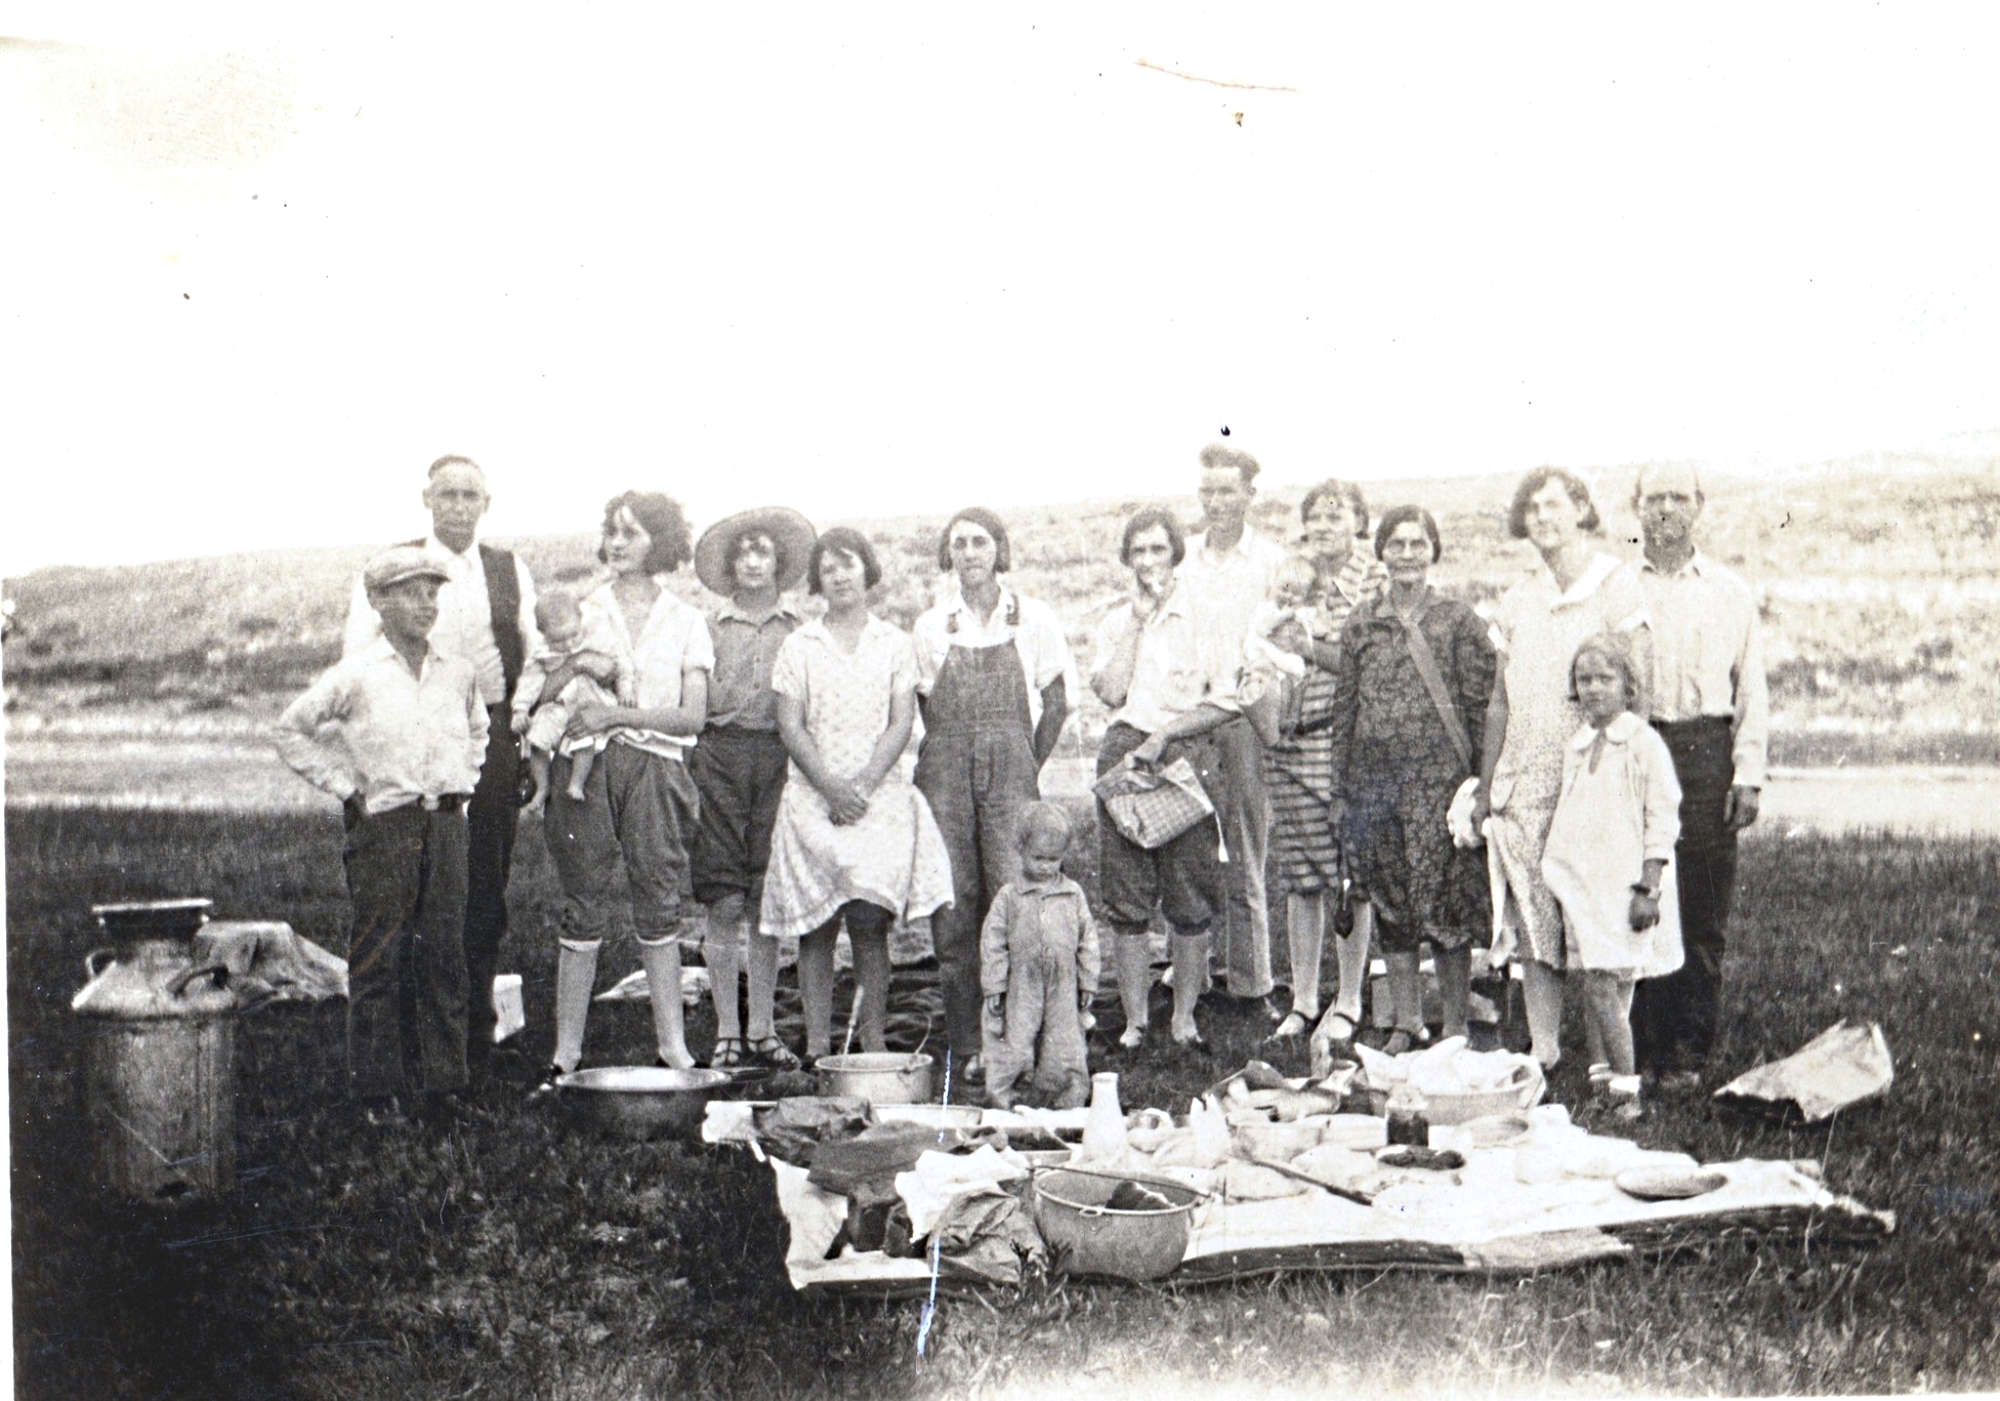 Picnic on the Canadian Near Borger Texas in 1929